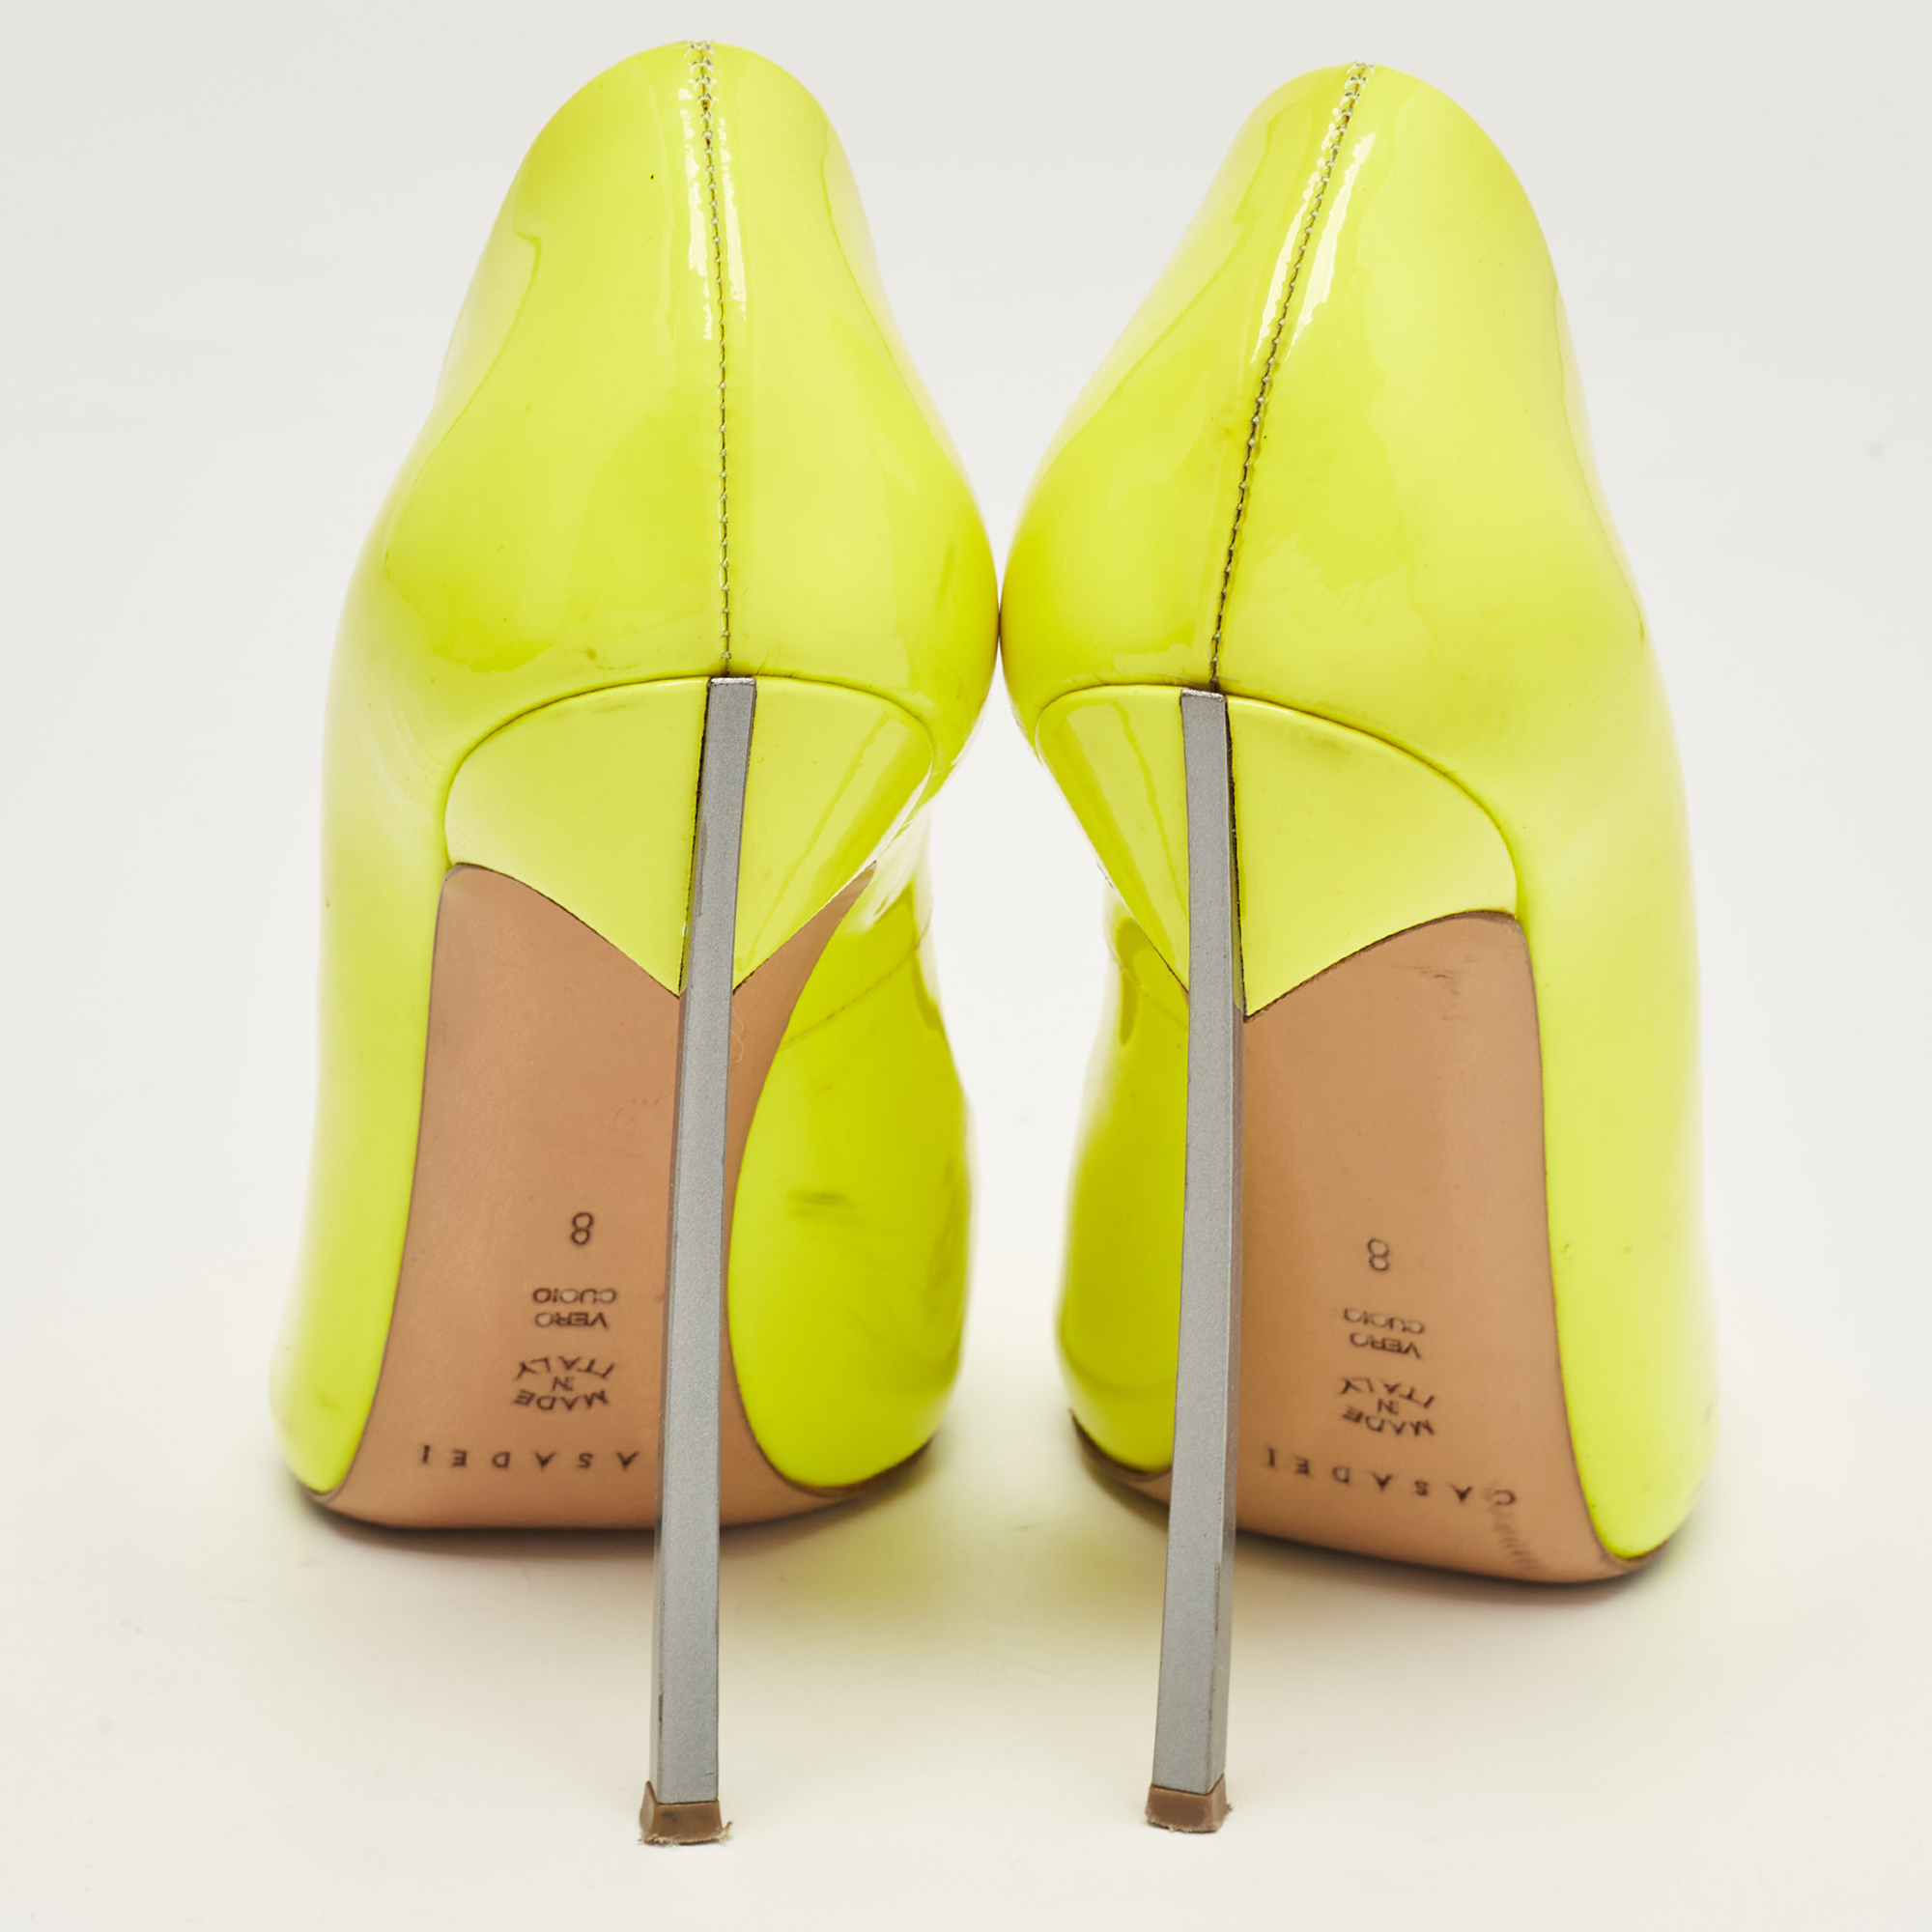 Casadei Neon Yellow Patent Leather Blade Pumps Size 38